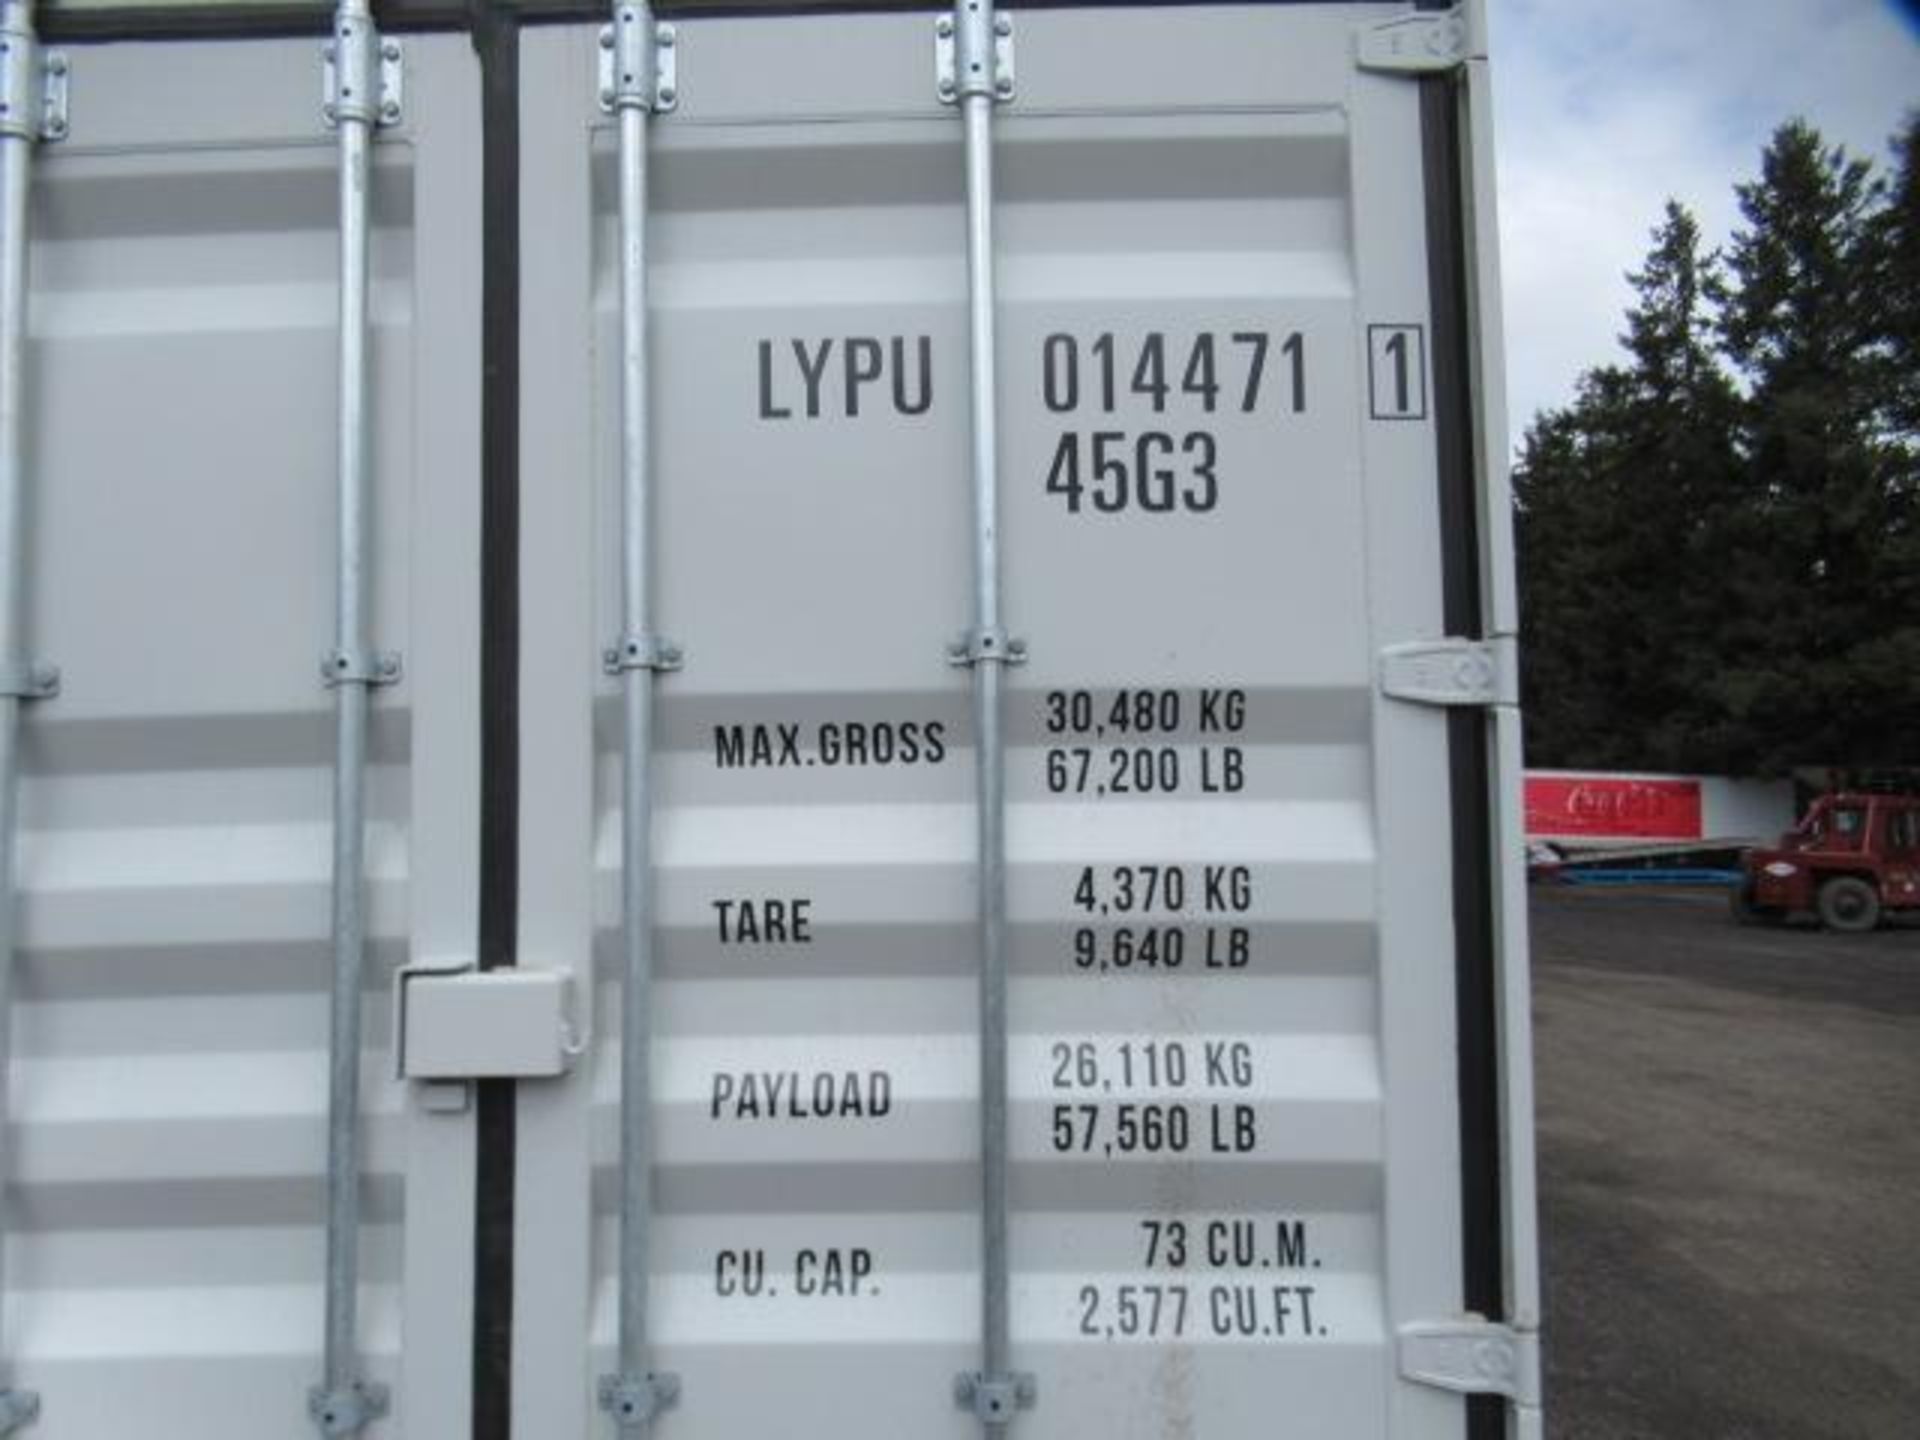 2024 40' HIGH CUBE SHIPPING CONTAINER W/ (2) SIDE DOORS, SER#: LYPU0144711 (UNUSED) - Image 6 of 6